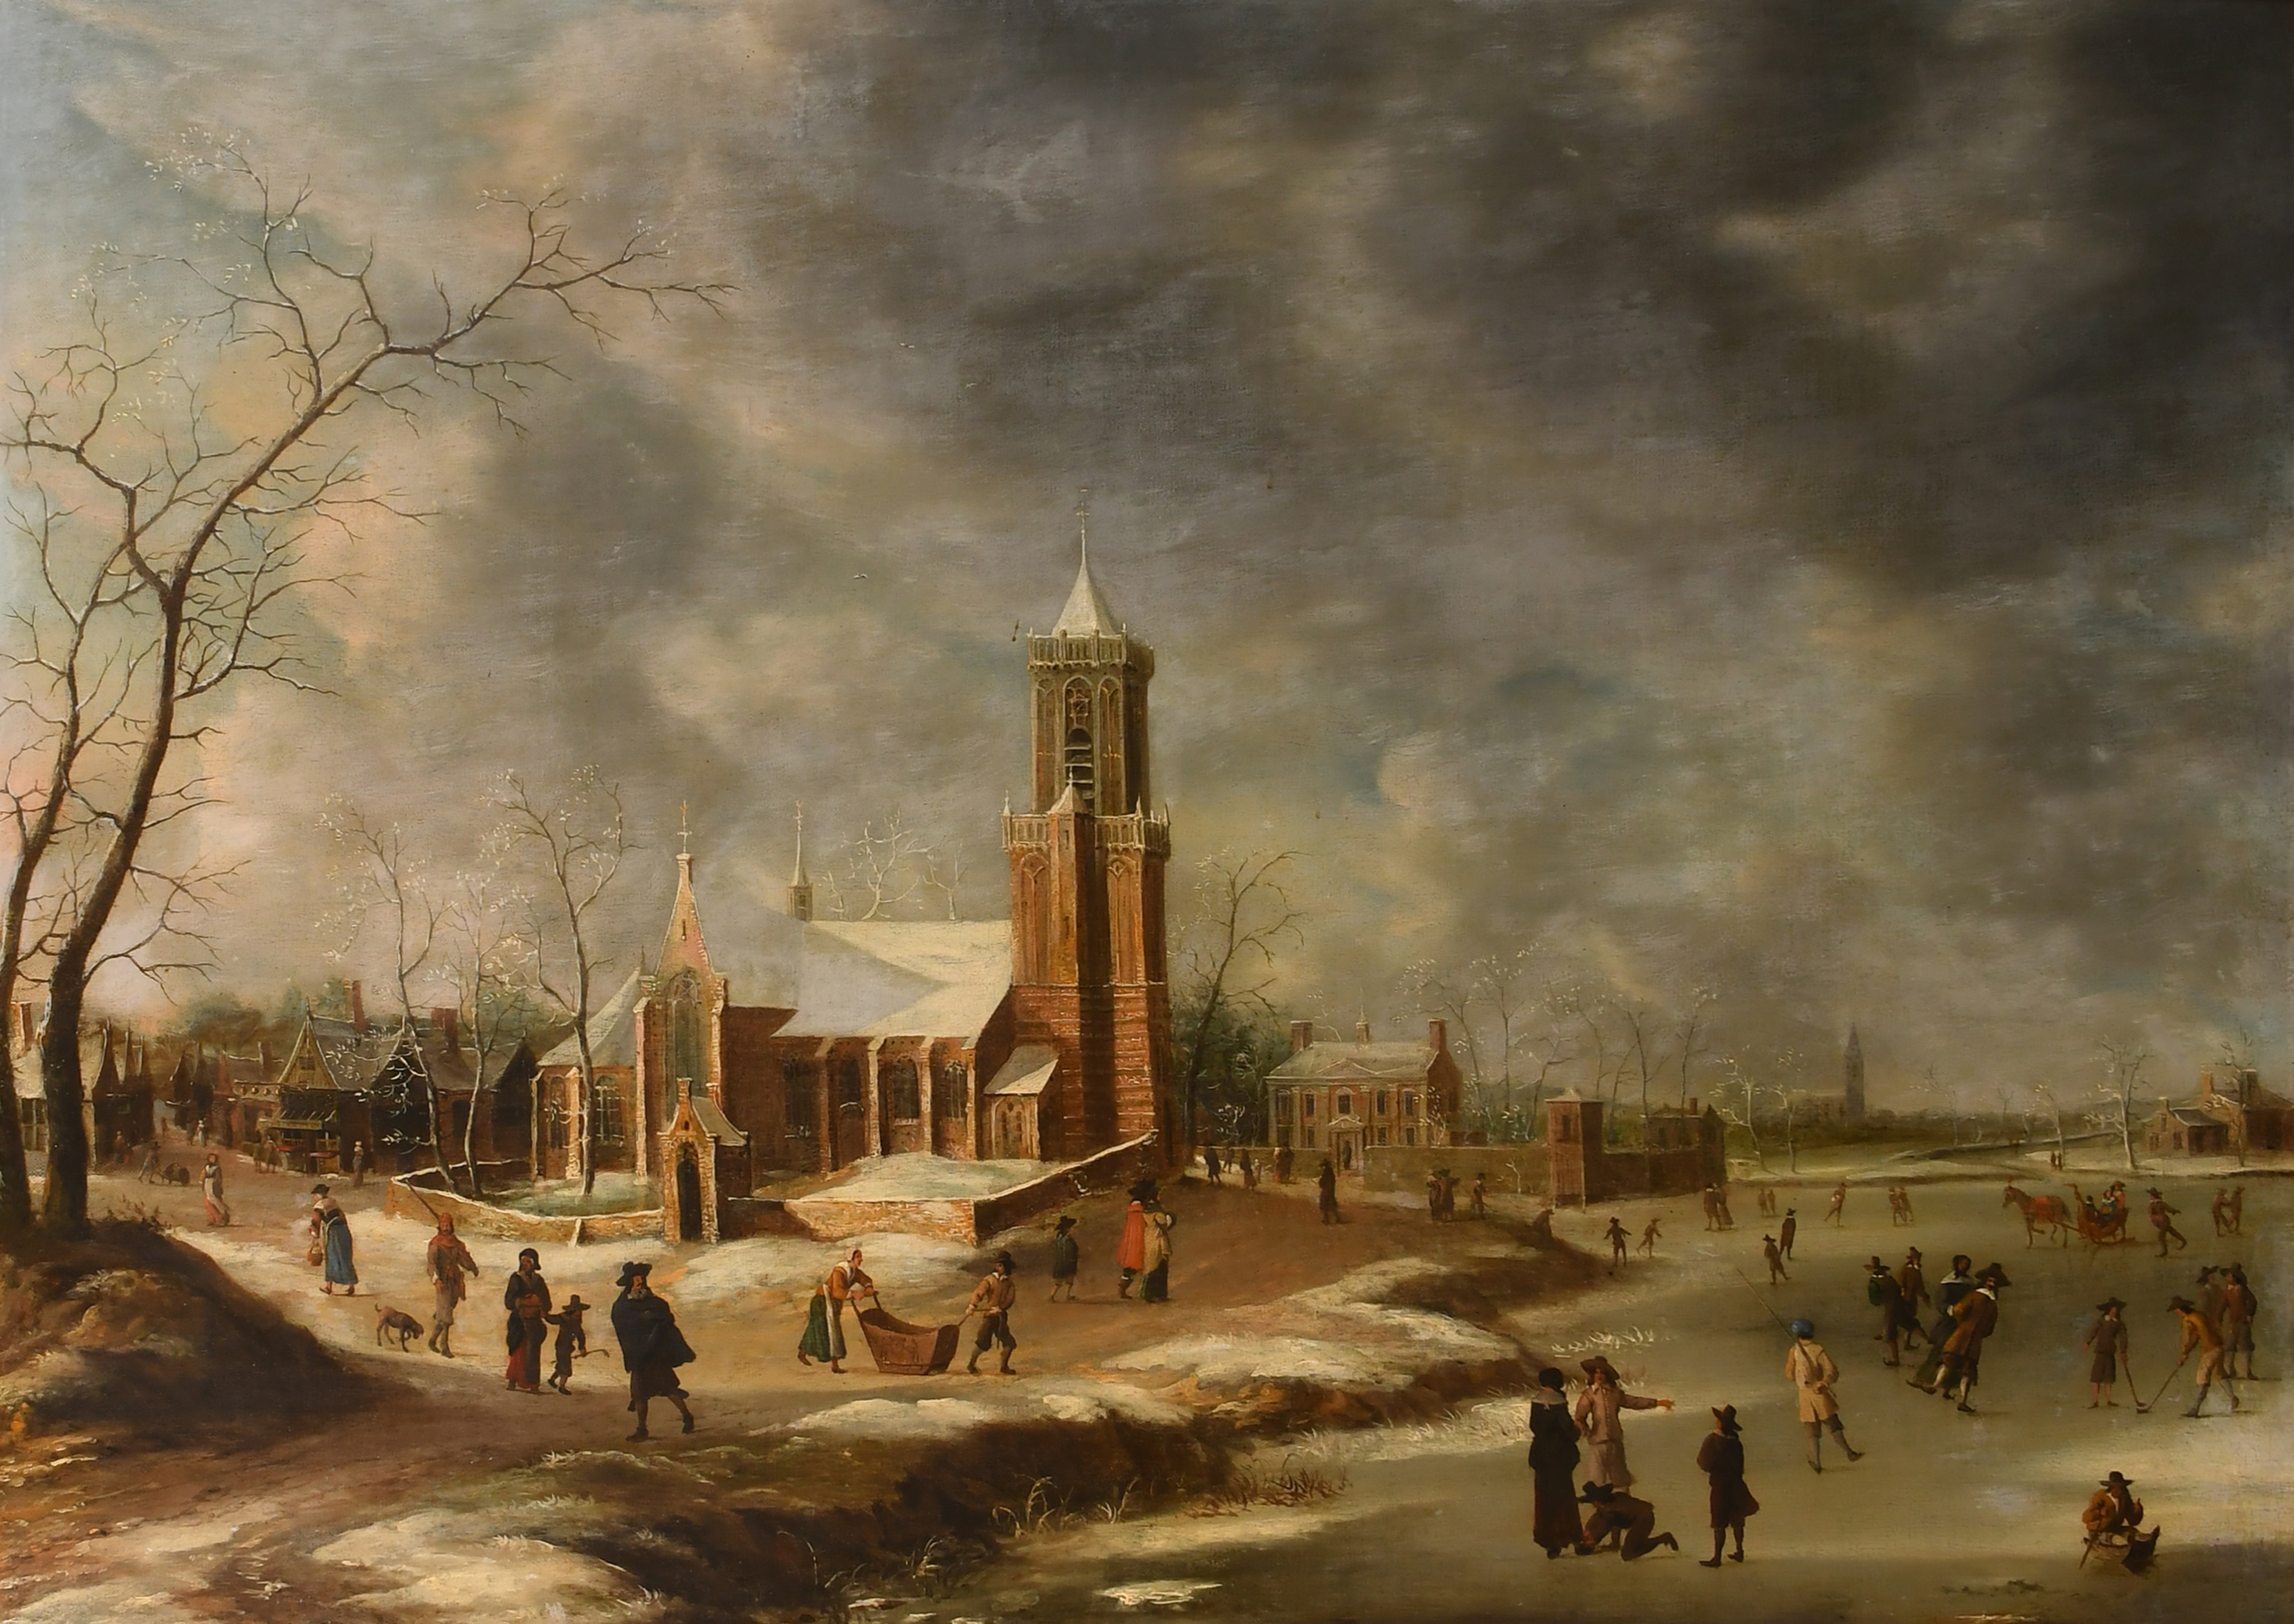 Manner of Abraham Beerstraaten (1643-1666) Dutch. A Winter Scene with Figures Skating, a church